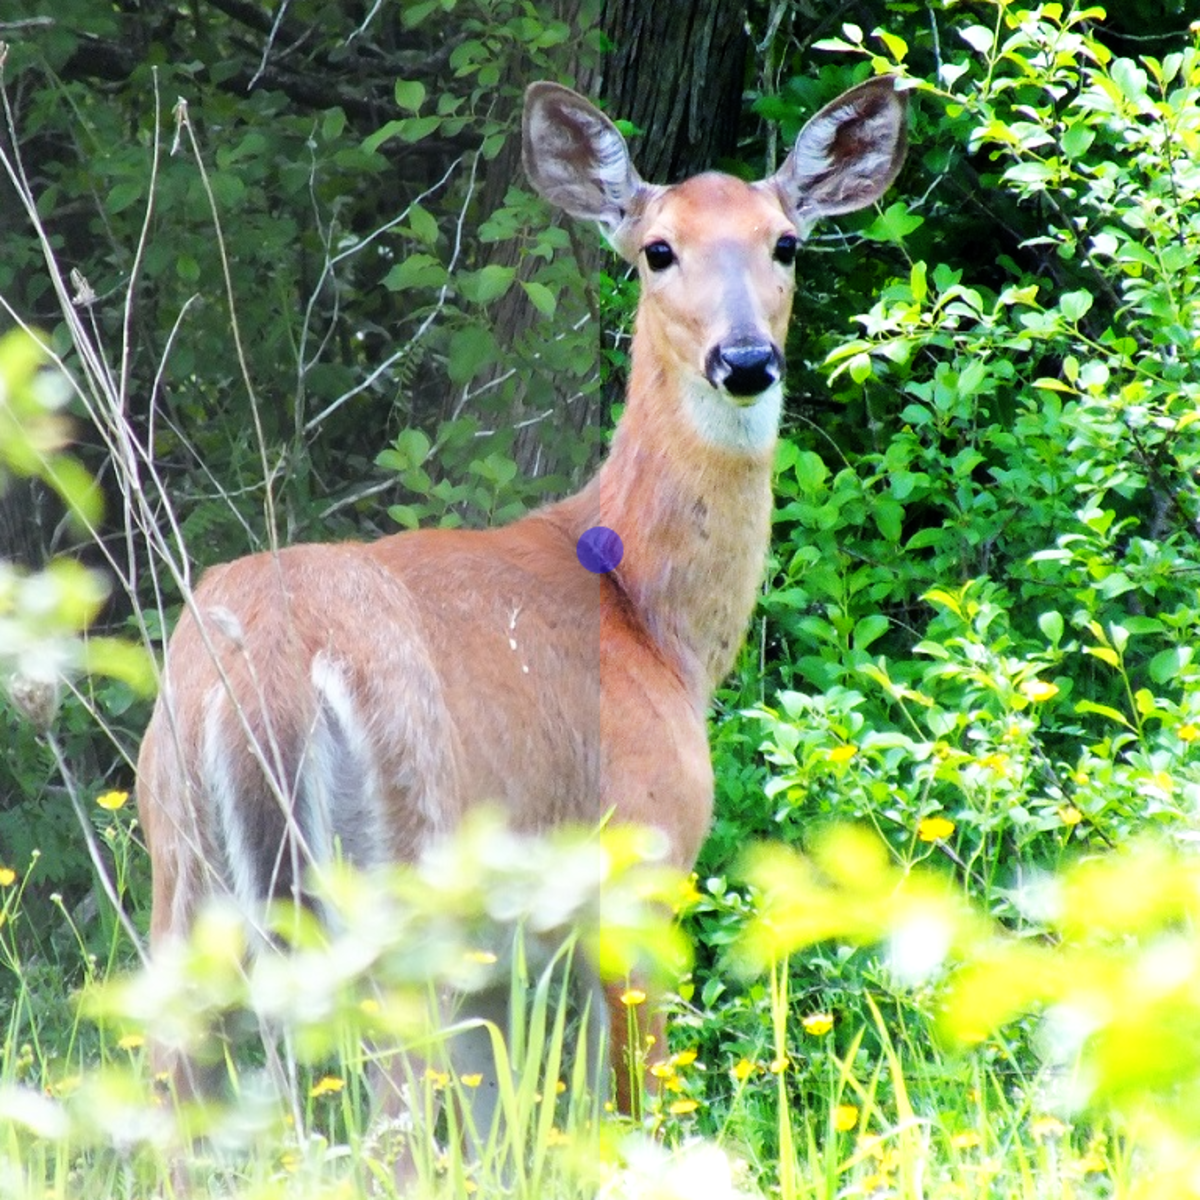 My best deer photo, before and after I improved the contrast and saturation.